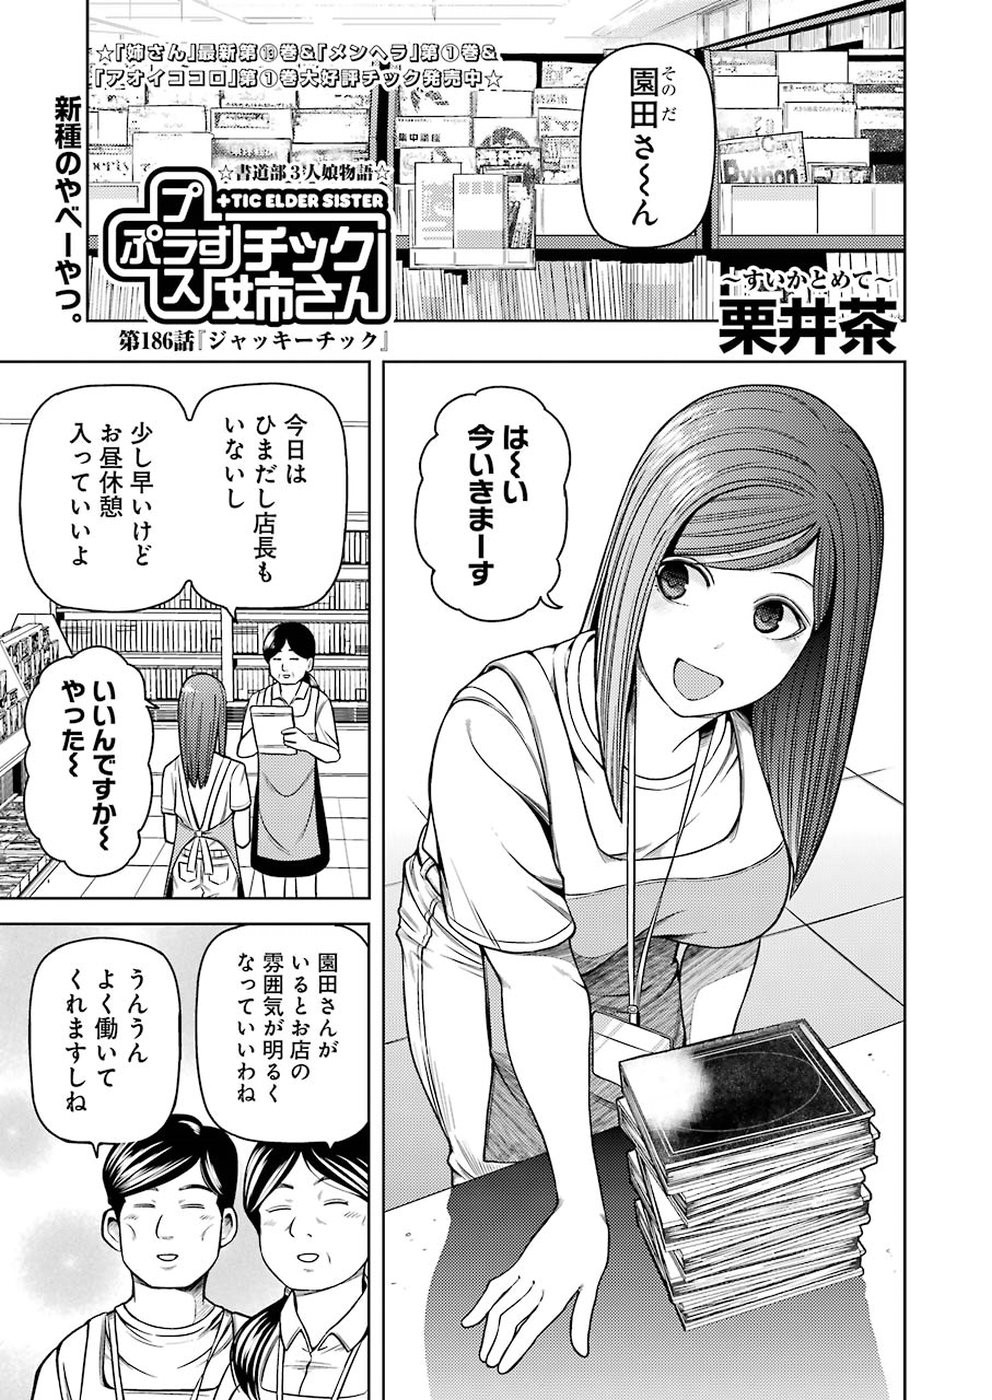 + Tic Nee-san - Chapter 186 - Page 1